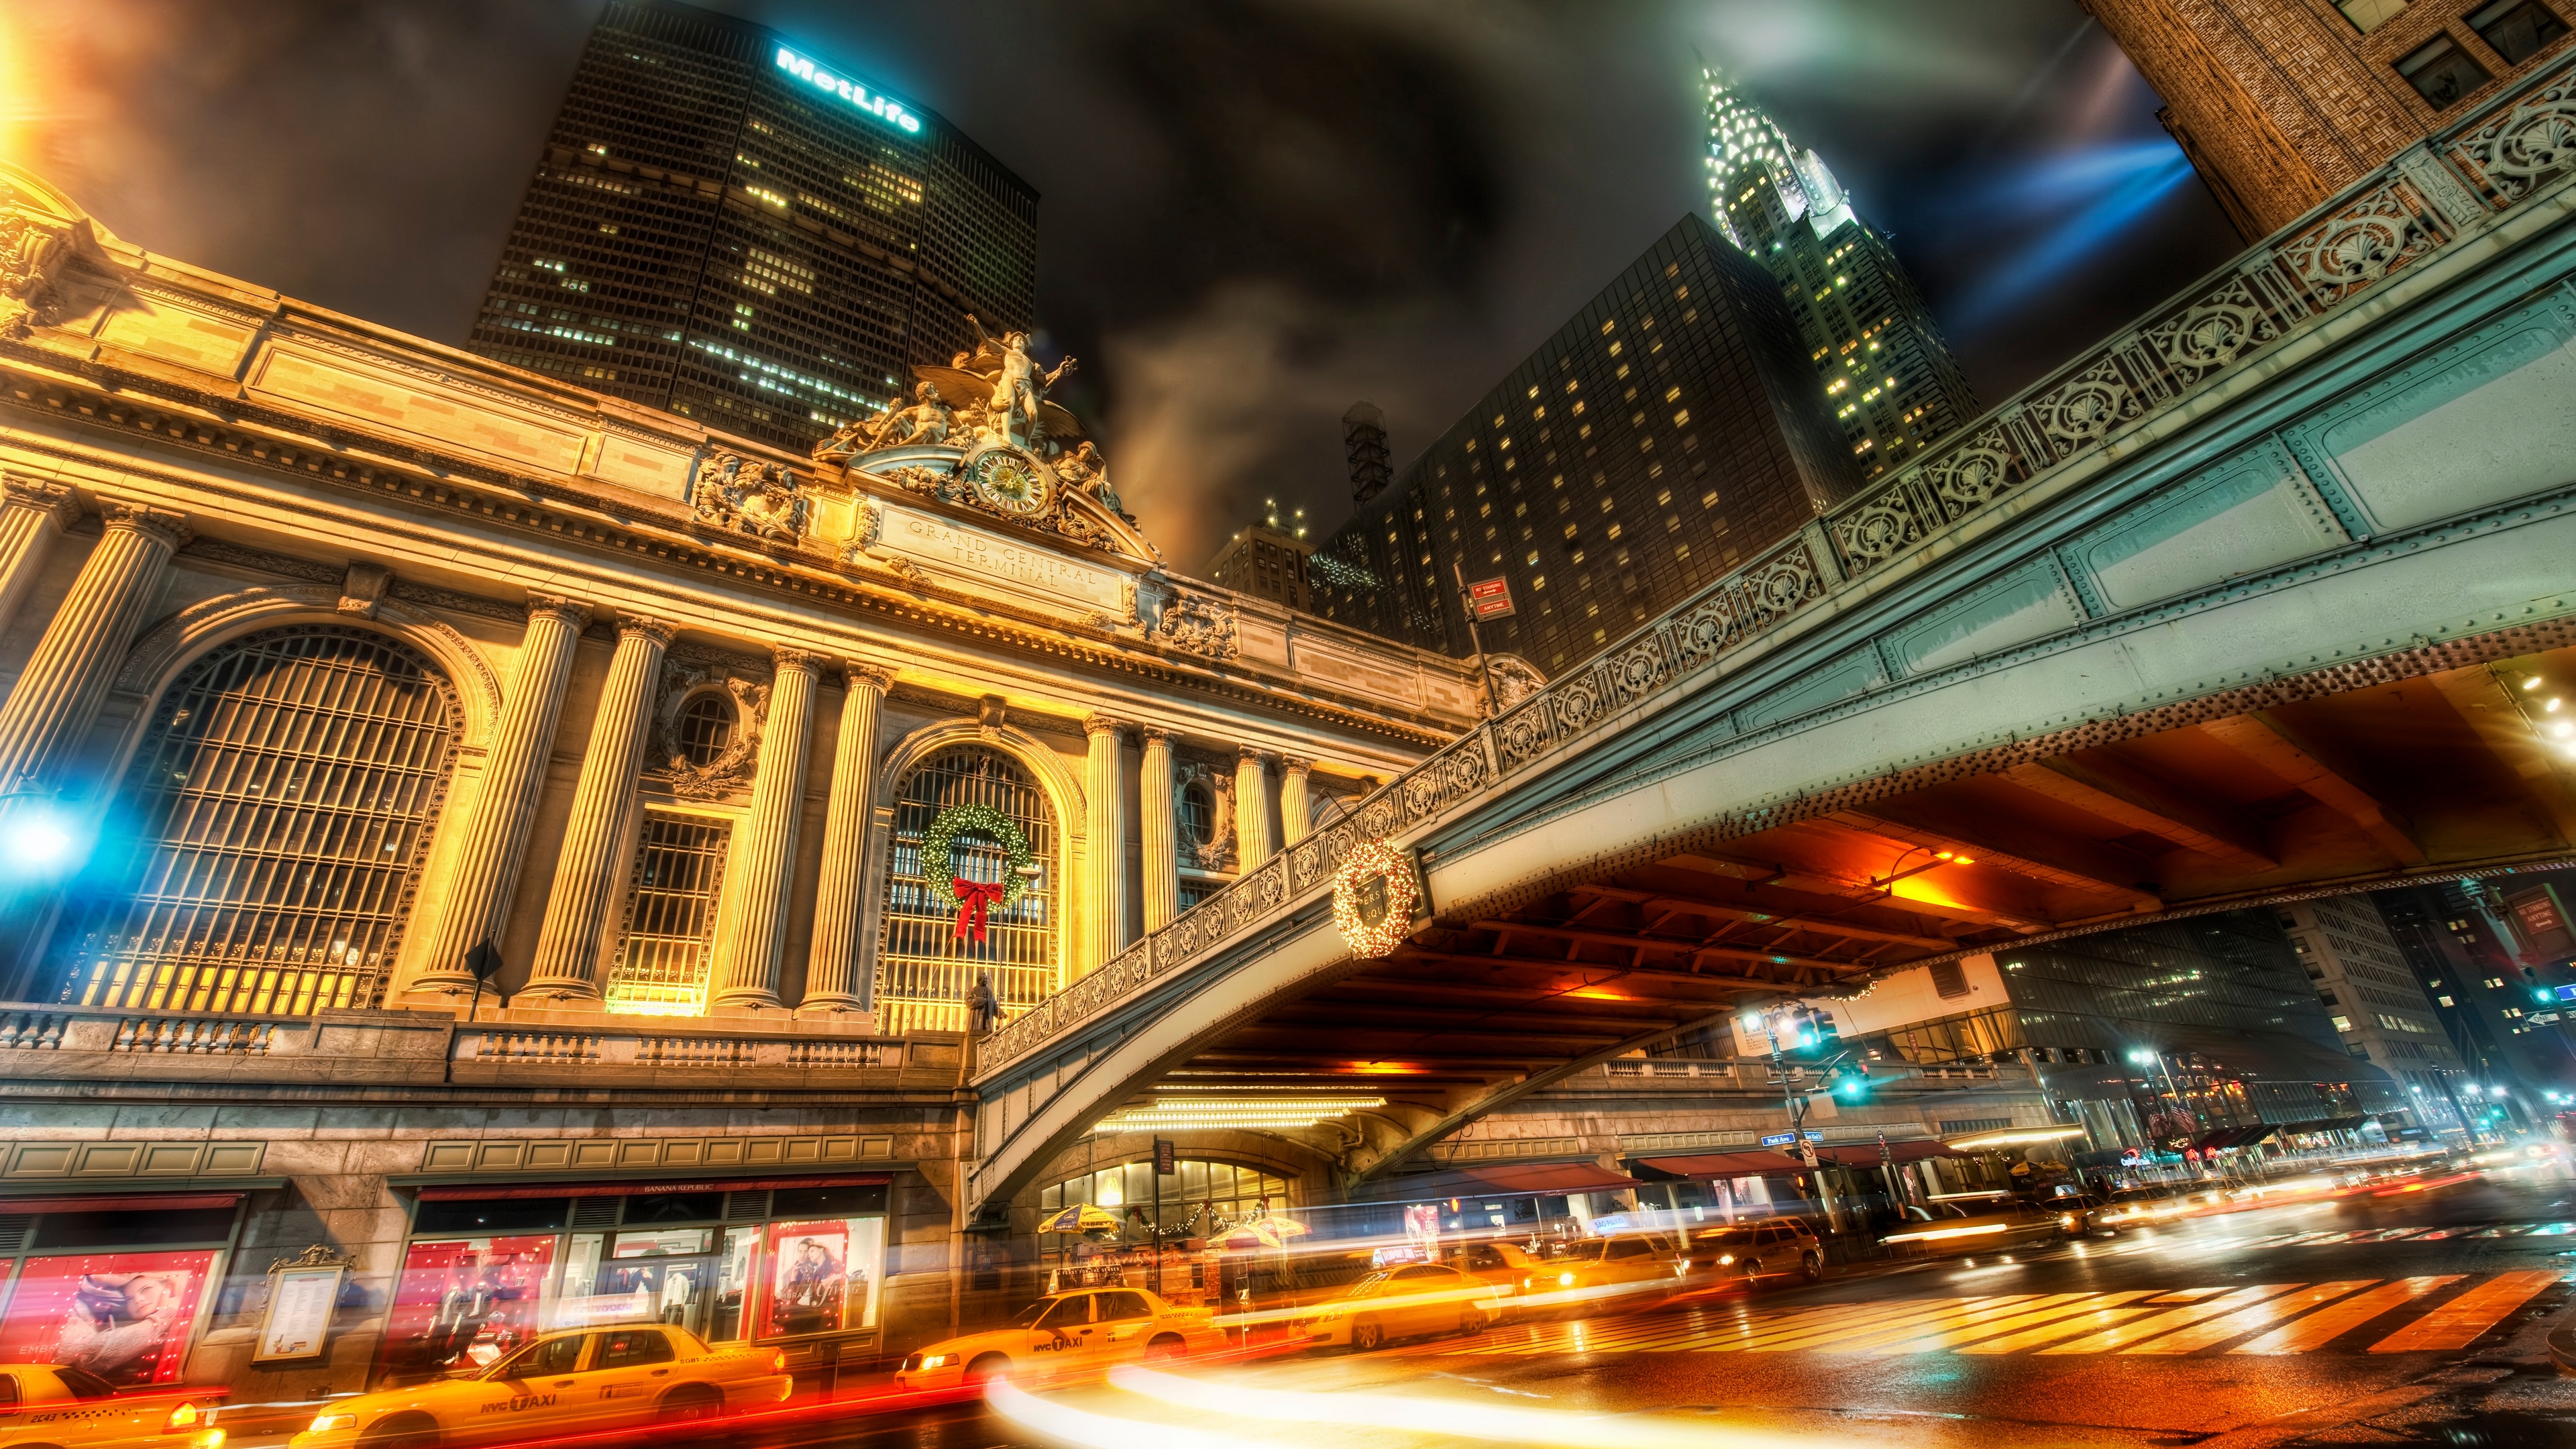 General 3840x2160 Trey Ratcliff photography New York City night lights building skyscraper street Grand Central Station Empire State Building bridge architecture city city lights car street light headlights taillights long exposure urban USA